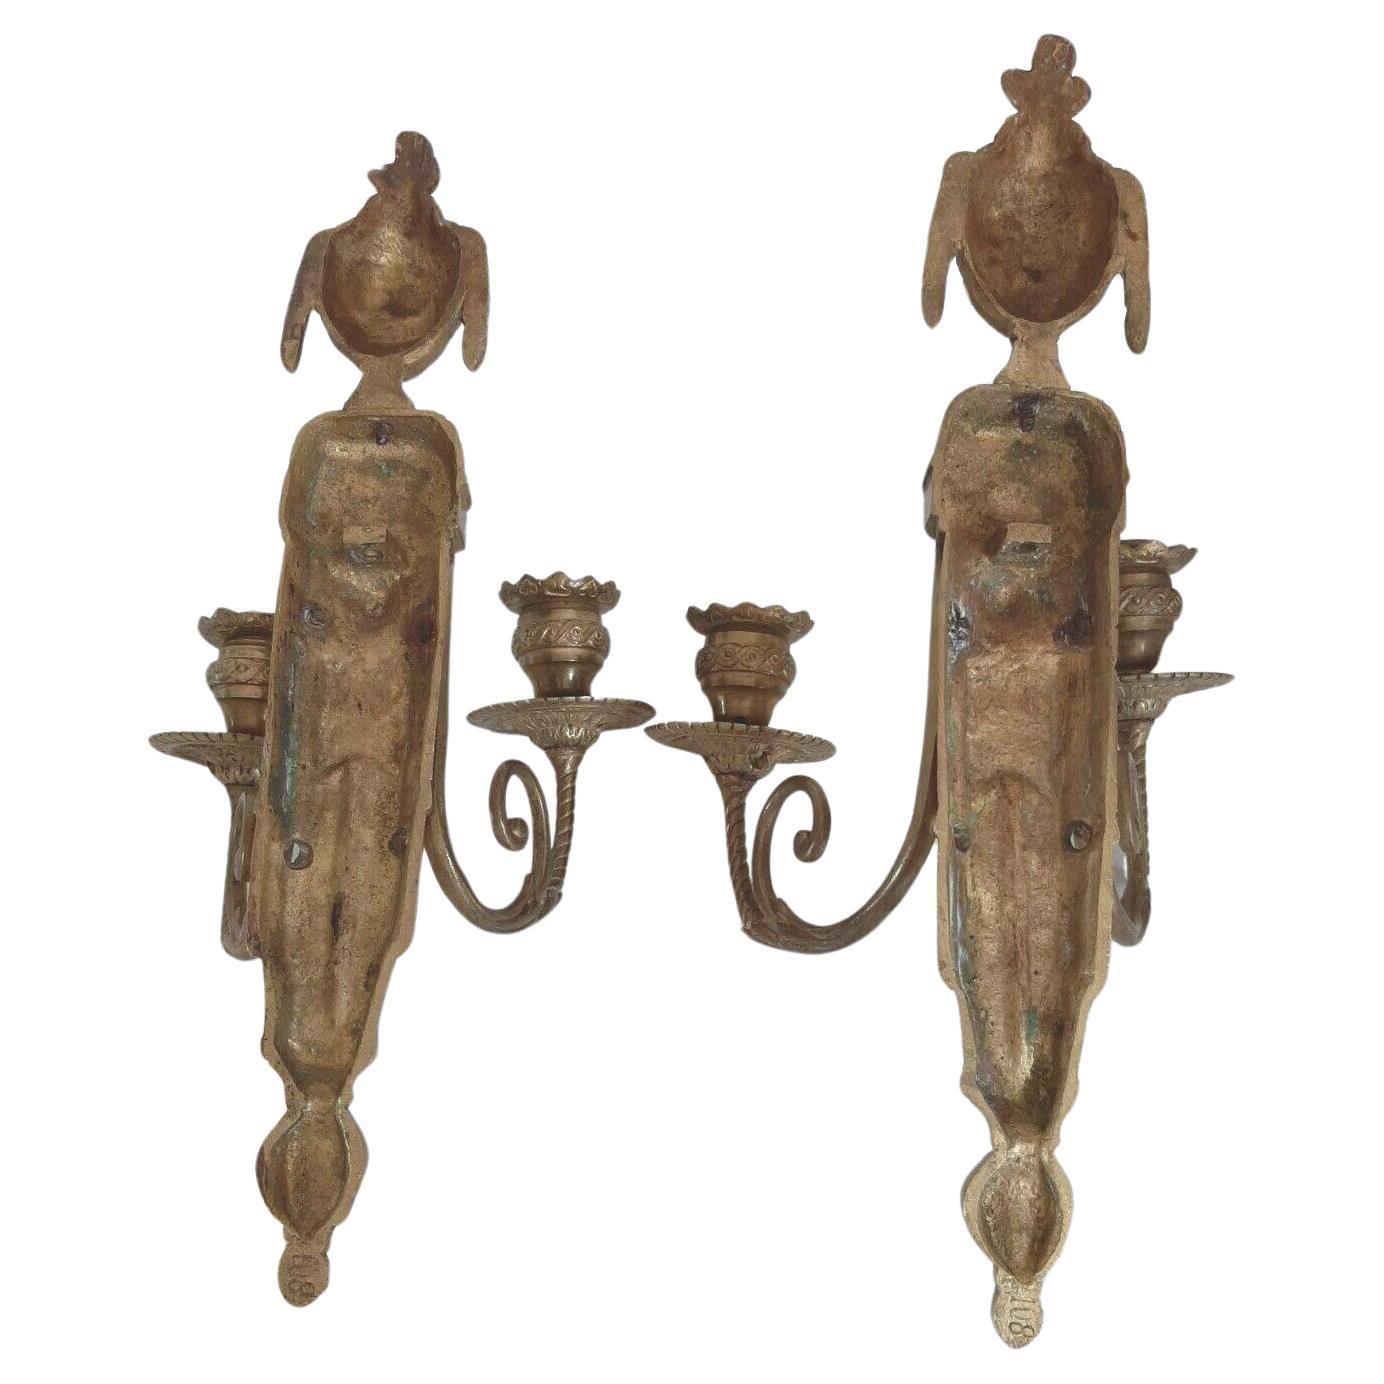 Pair 19thc French Louis XVI Neoclassical style Bronze Marked Wall Sconces. Original Unelectrified State. Highly detailed and numbere mark on back. Very nice quality.